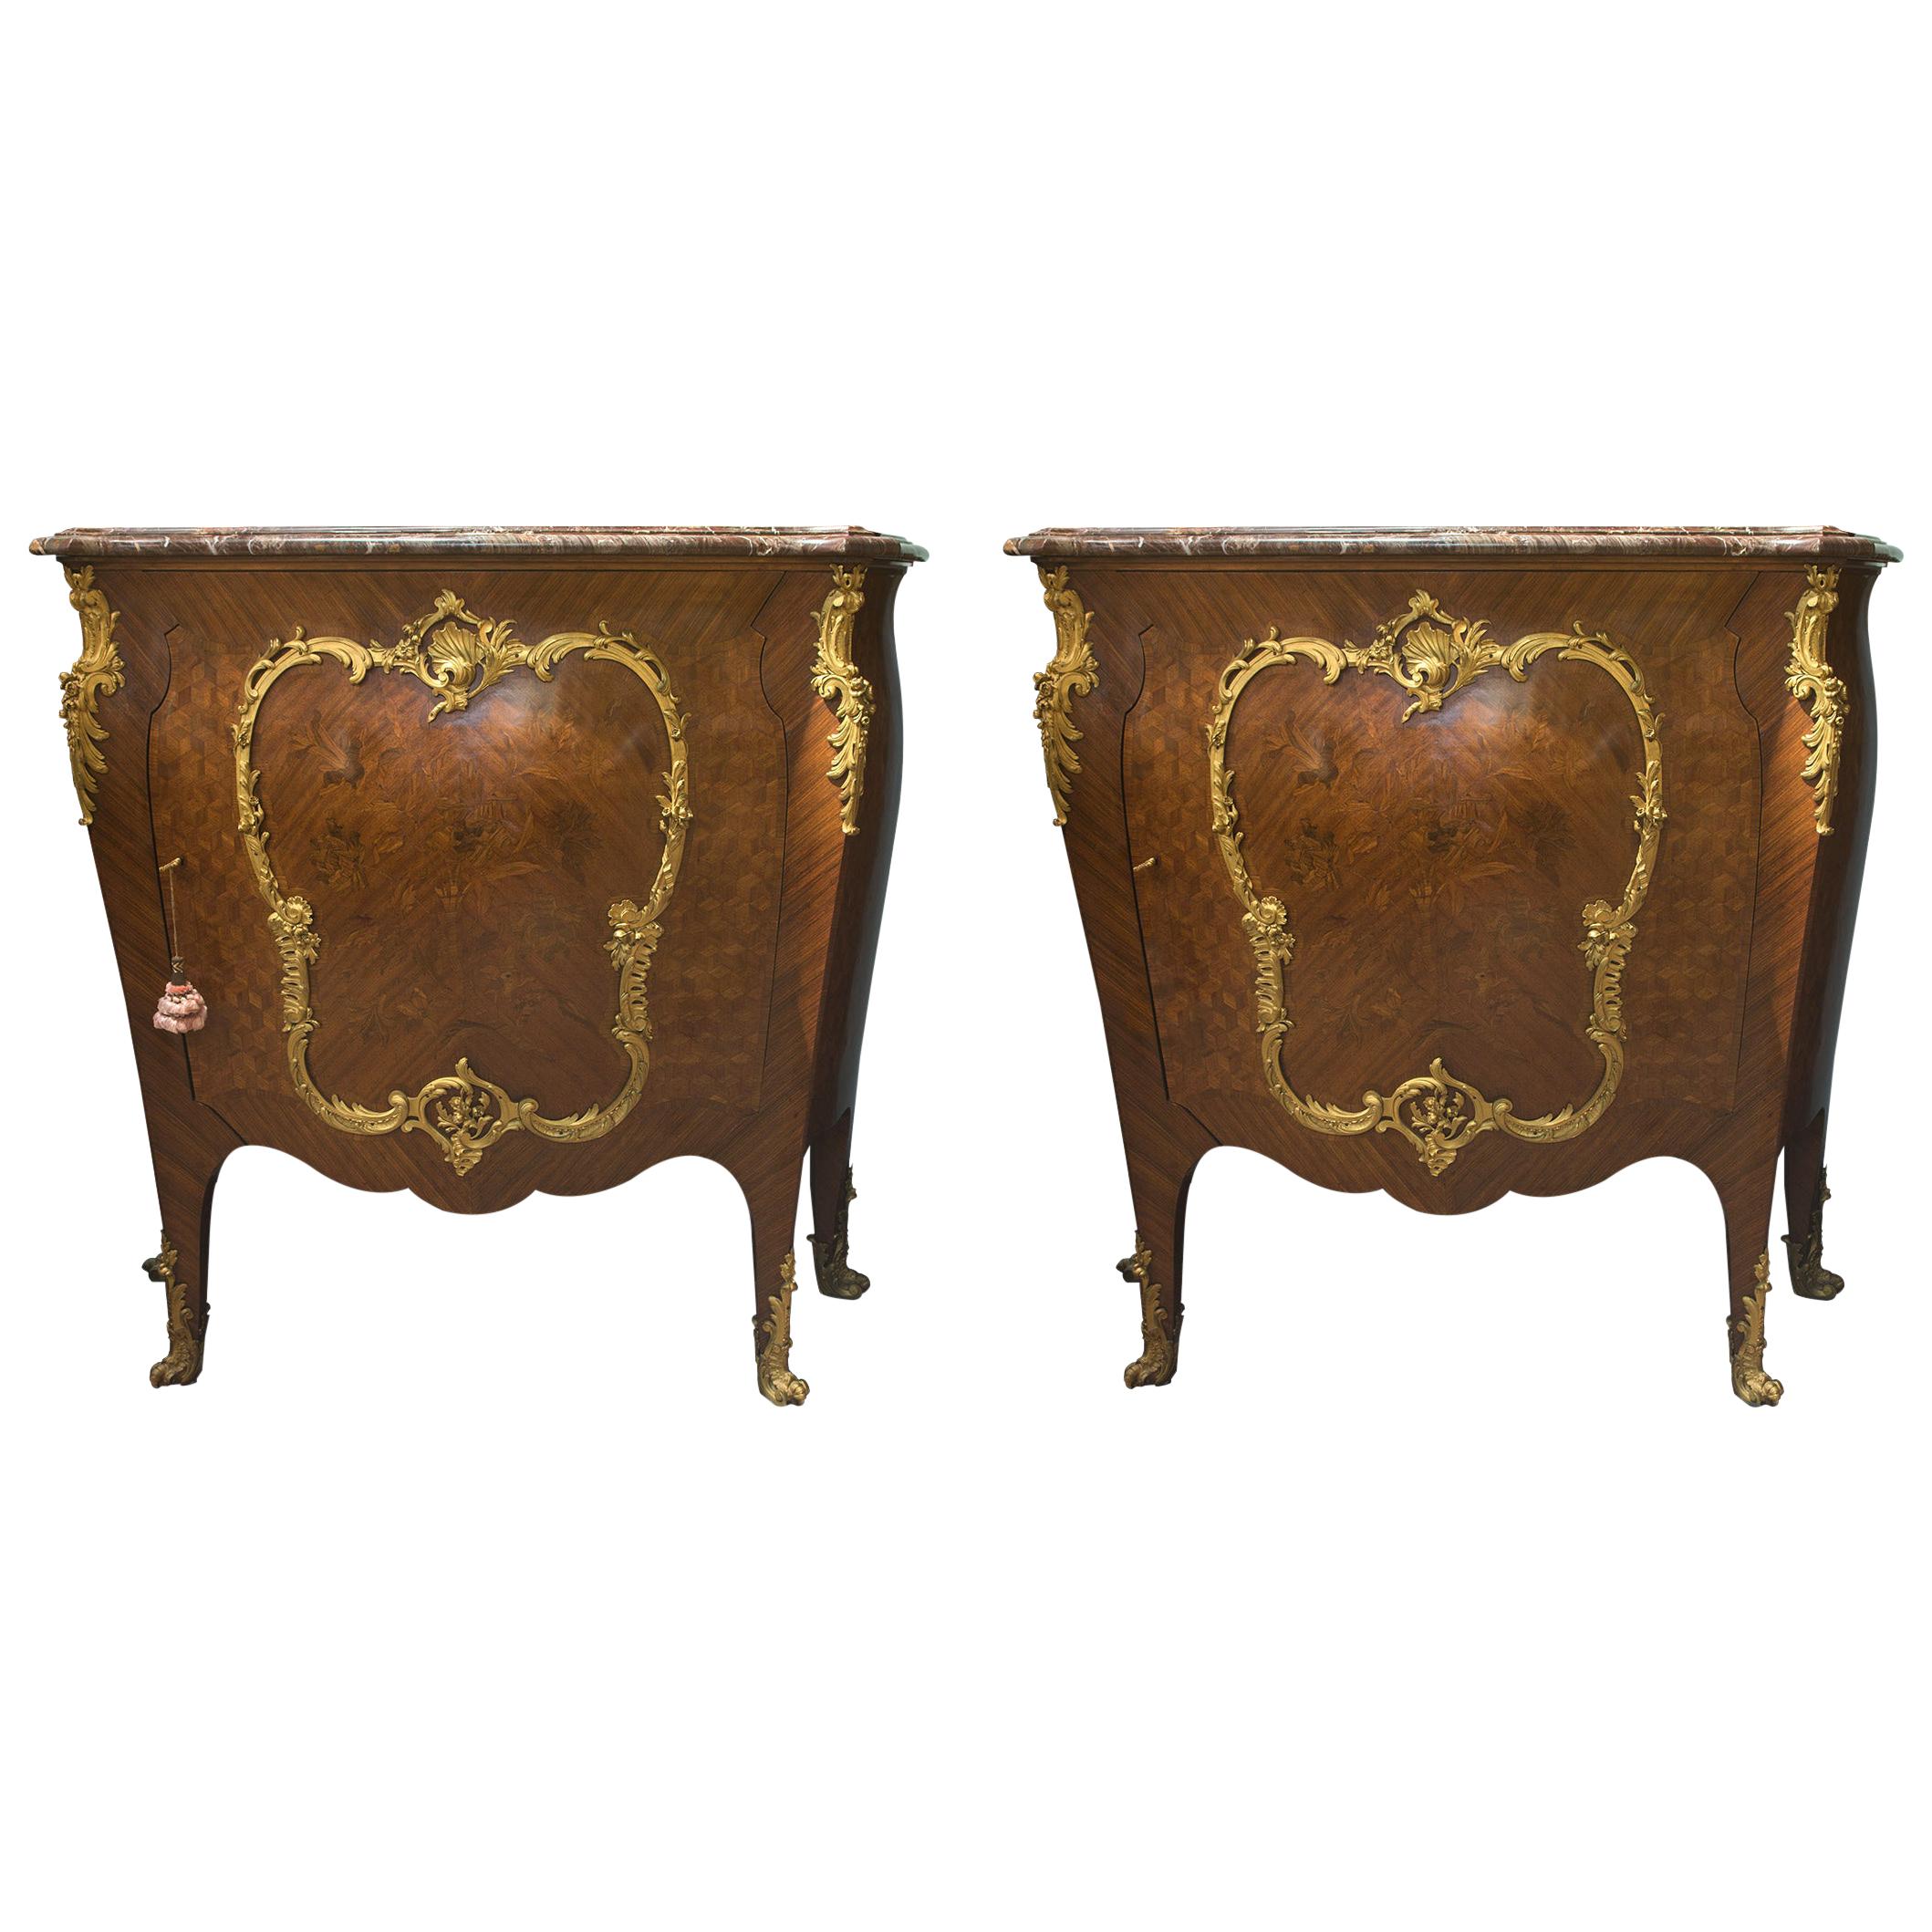 Pair of Louis XV Style Gilt Bronze Mounted Kingwood Marble Top Commode